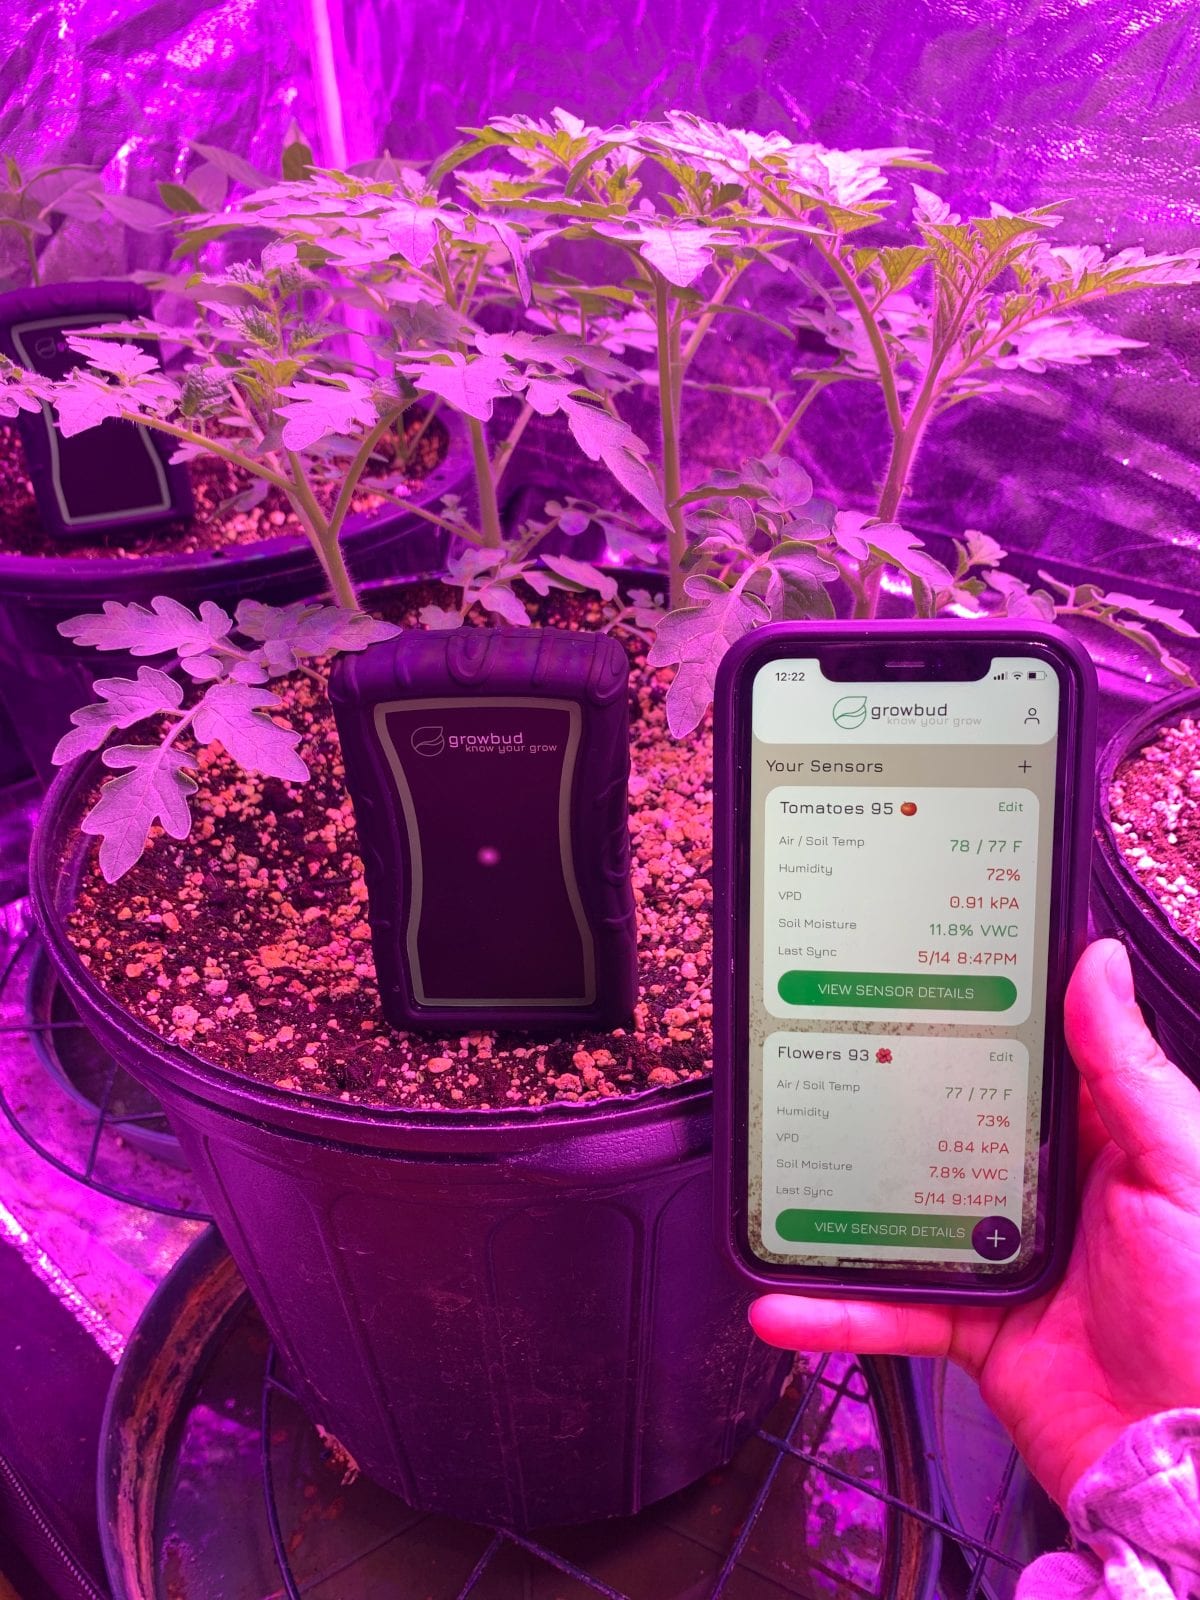 growbud sensor and app with tomatoes